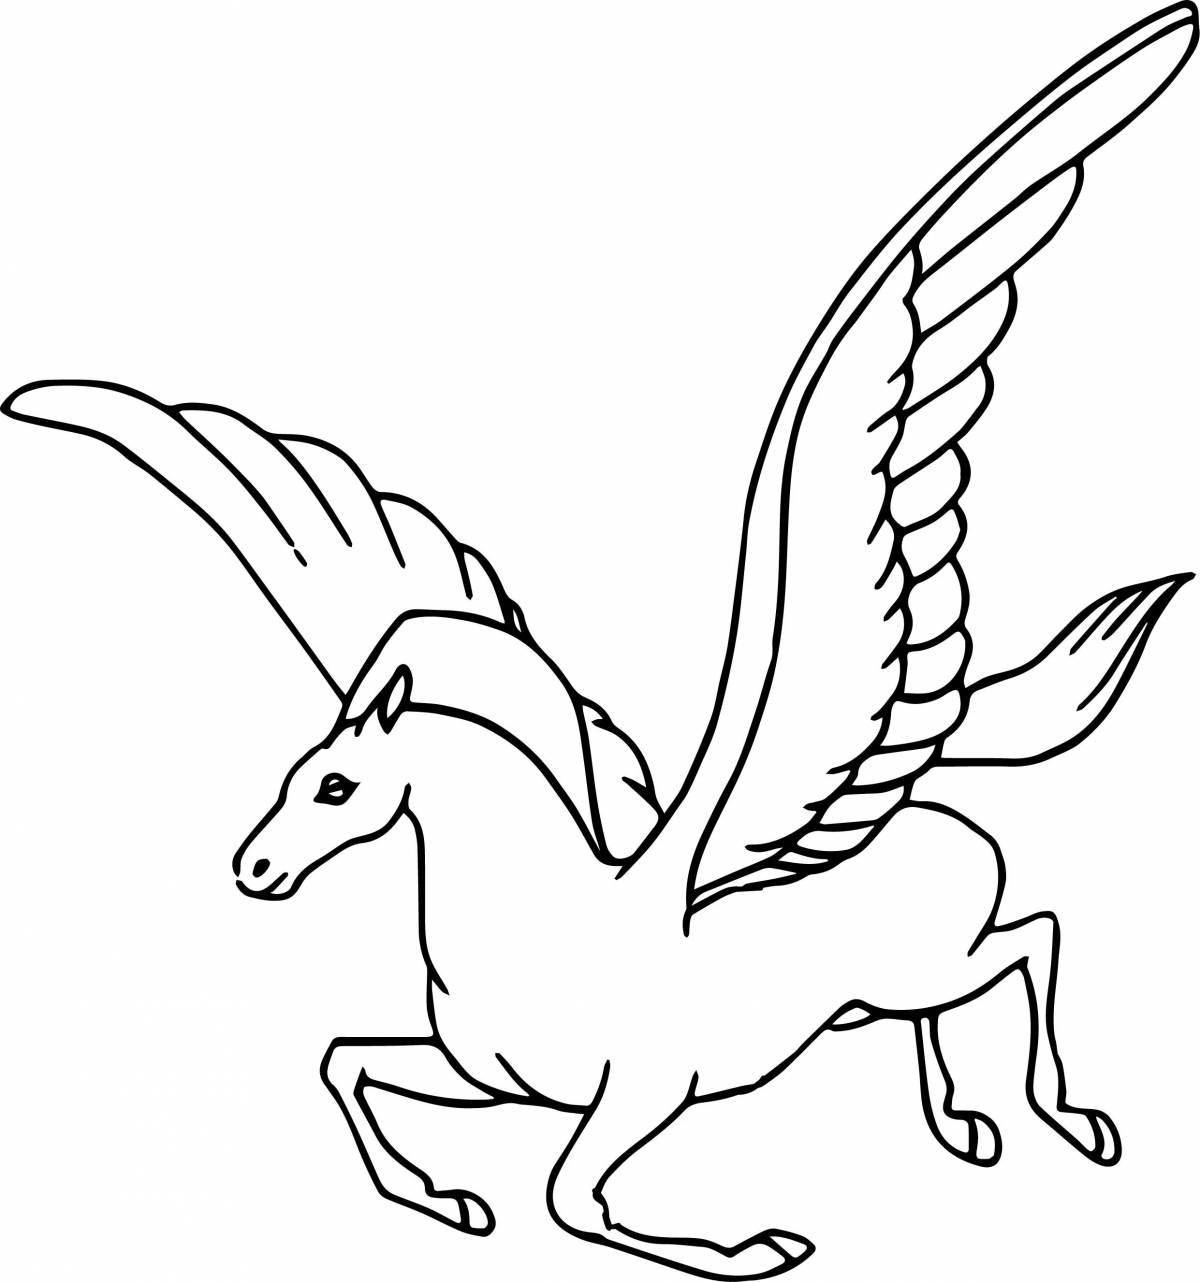 Coloring unicorn with wings